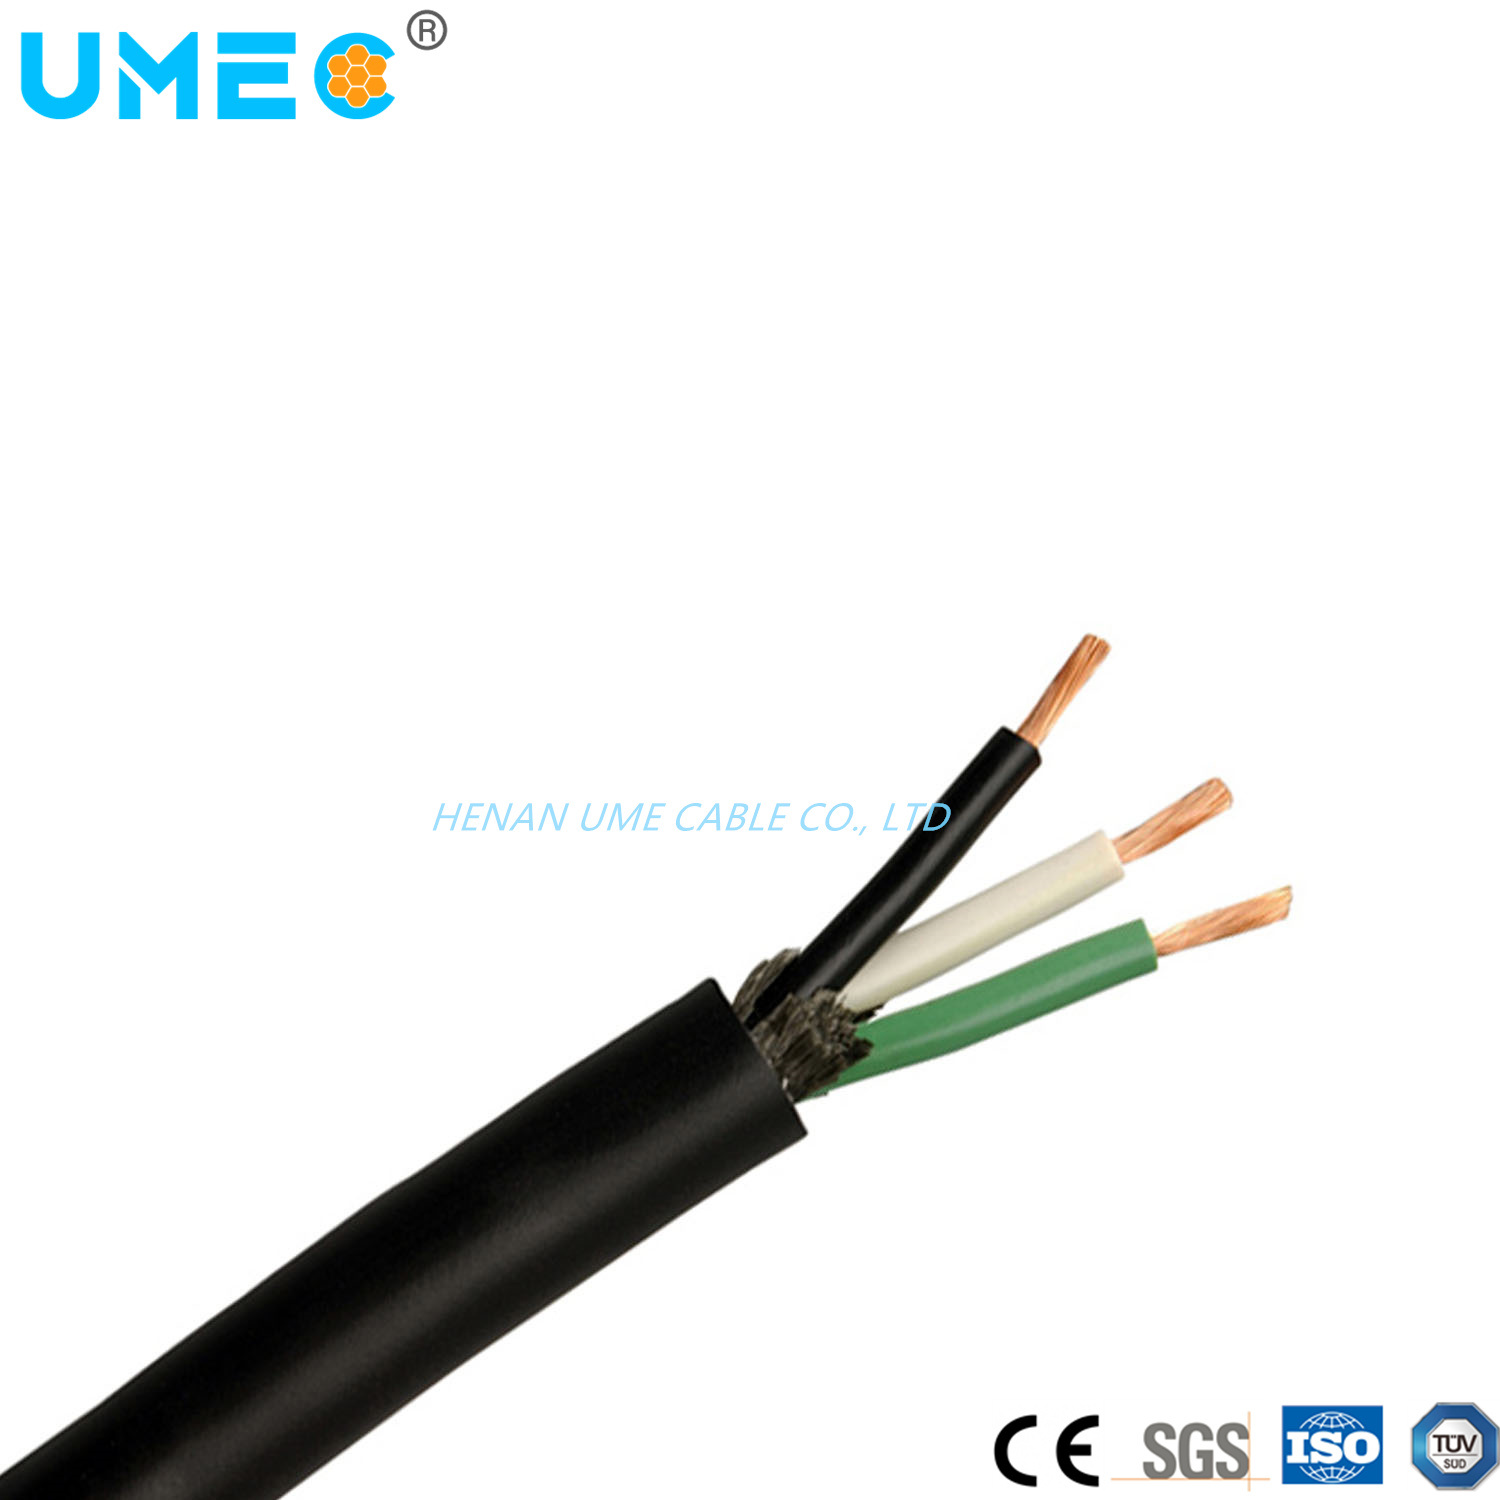 American Approved So Sow Soow Sjow Sjoow Rubber Sheathed Flexible Rubber Cable